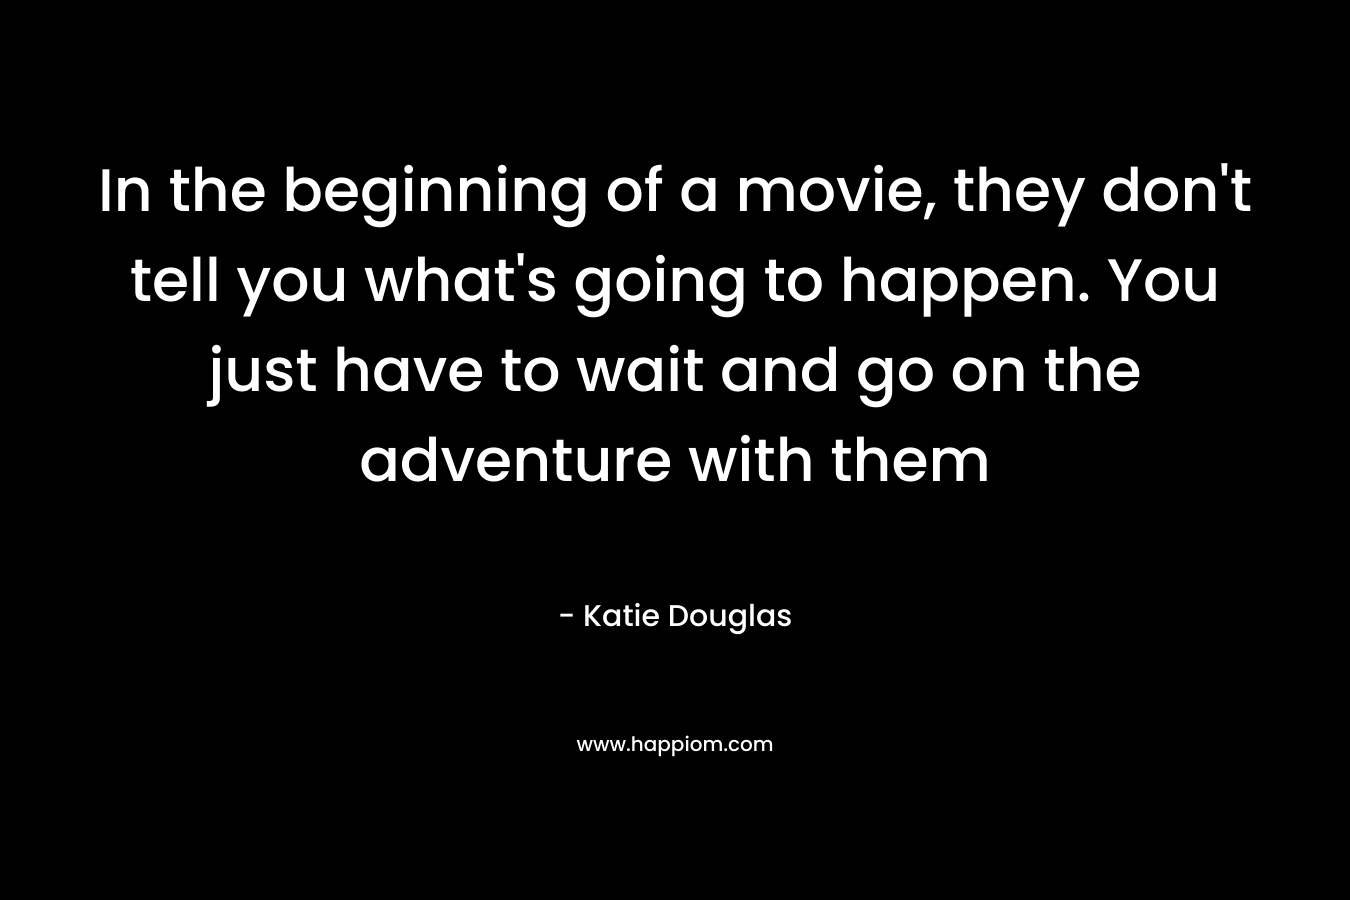 In the beginning of a movie, they don't tell you what's going to happen. You just have to wait and go on the adventure with them